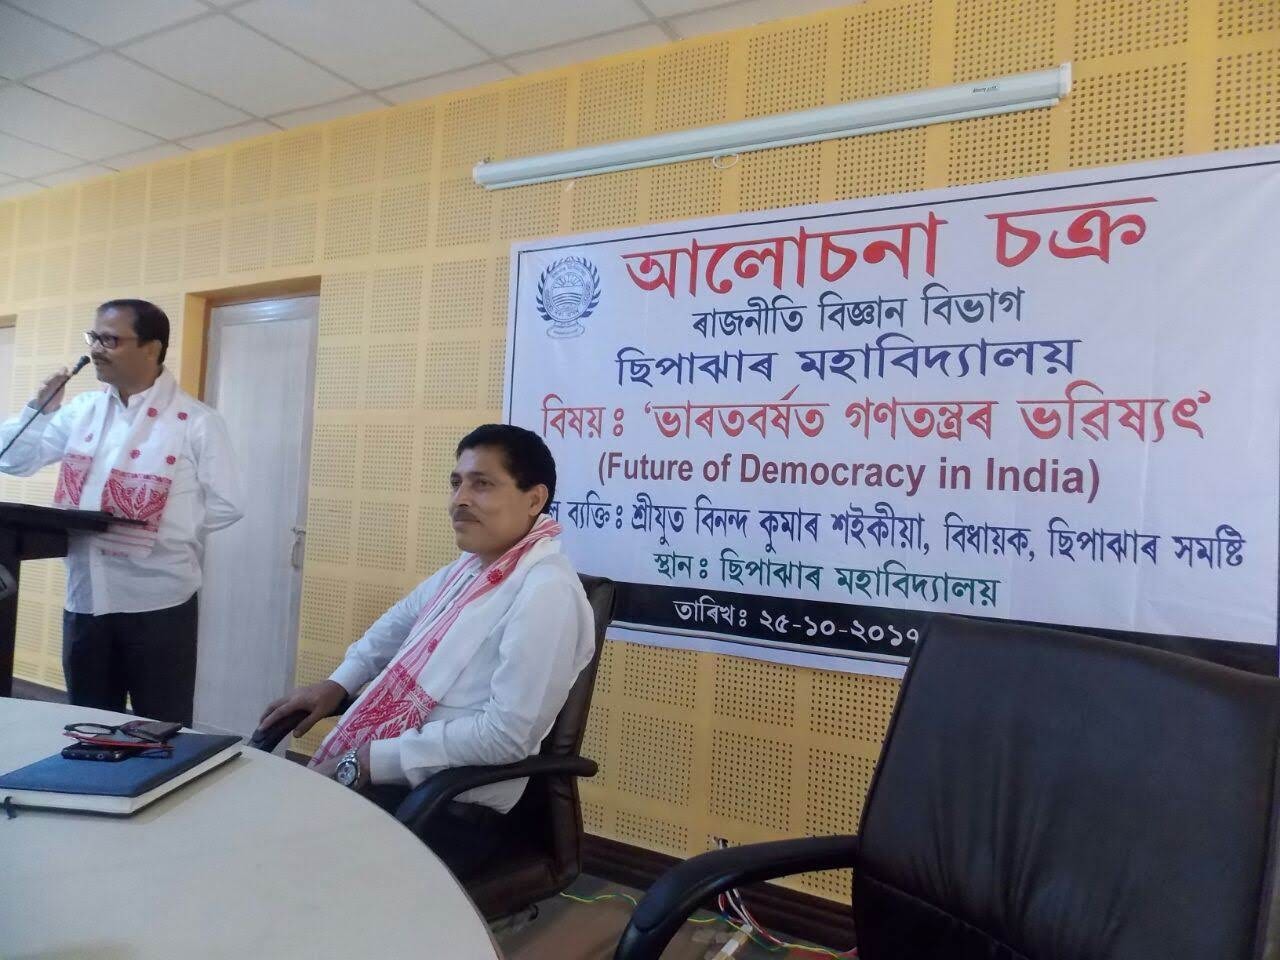 Seminar orgnized by Department of Political Science on Future of Democracy in India on 25.10.2017